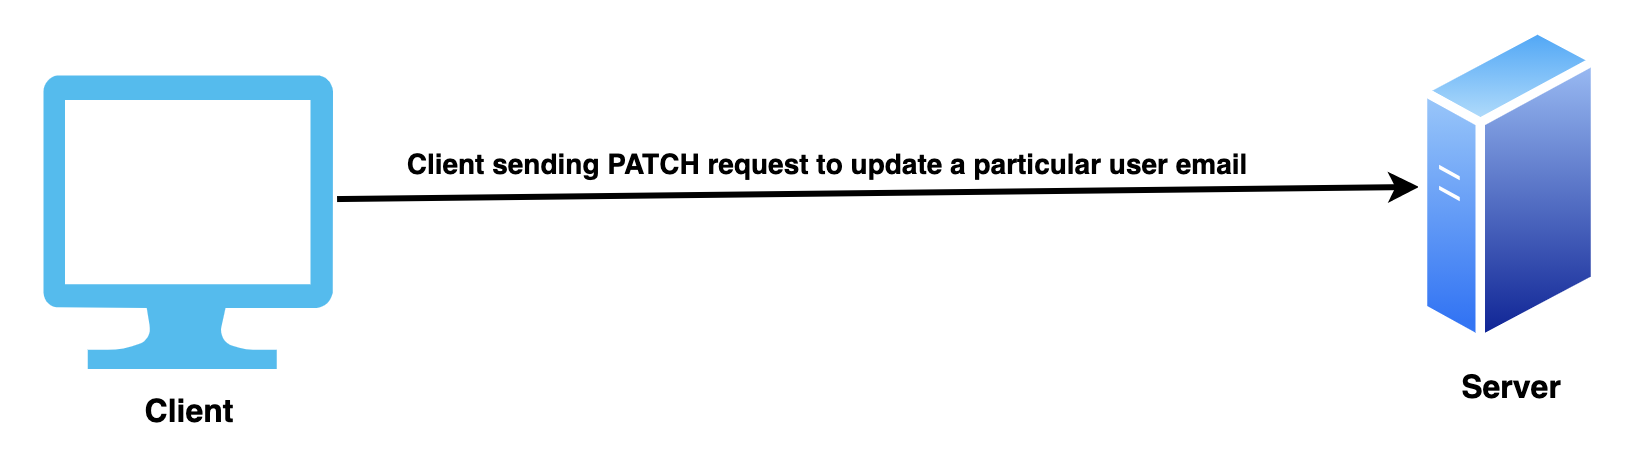 PATCH request